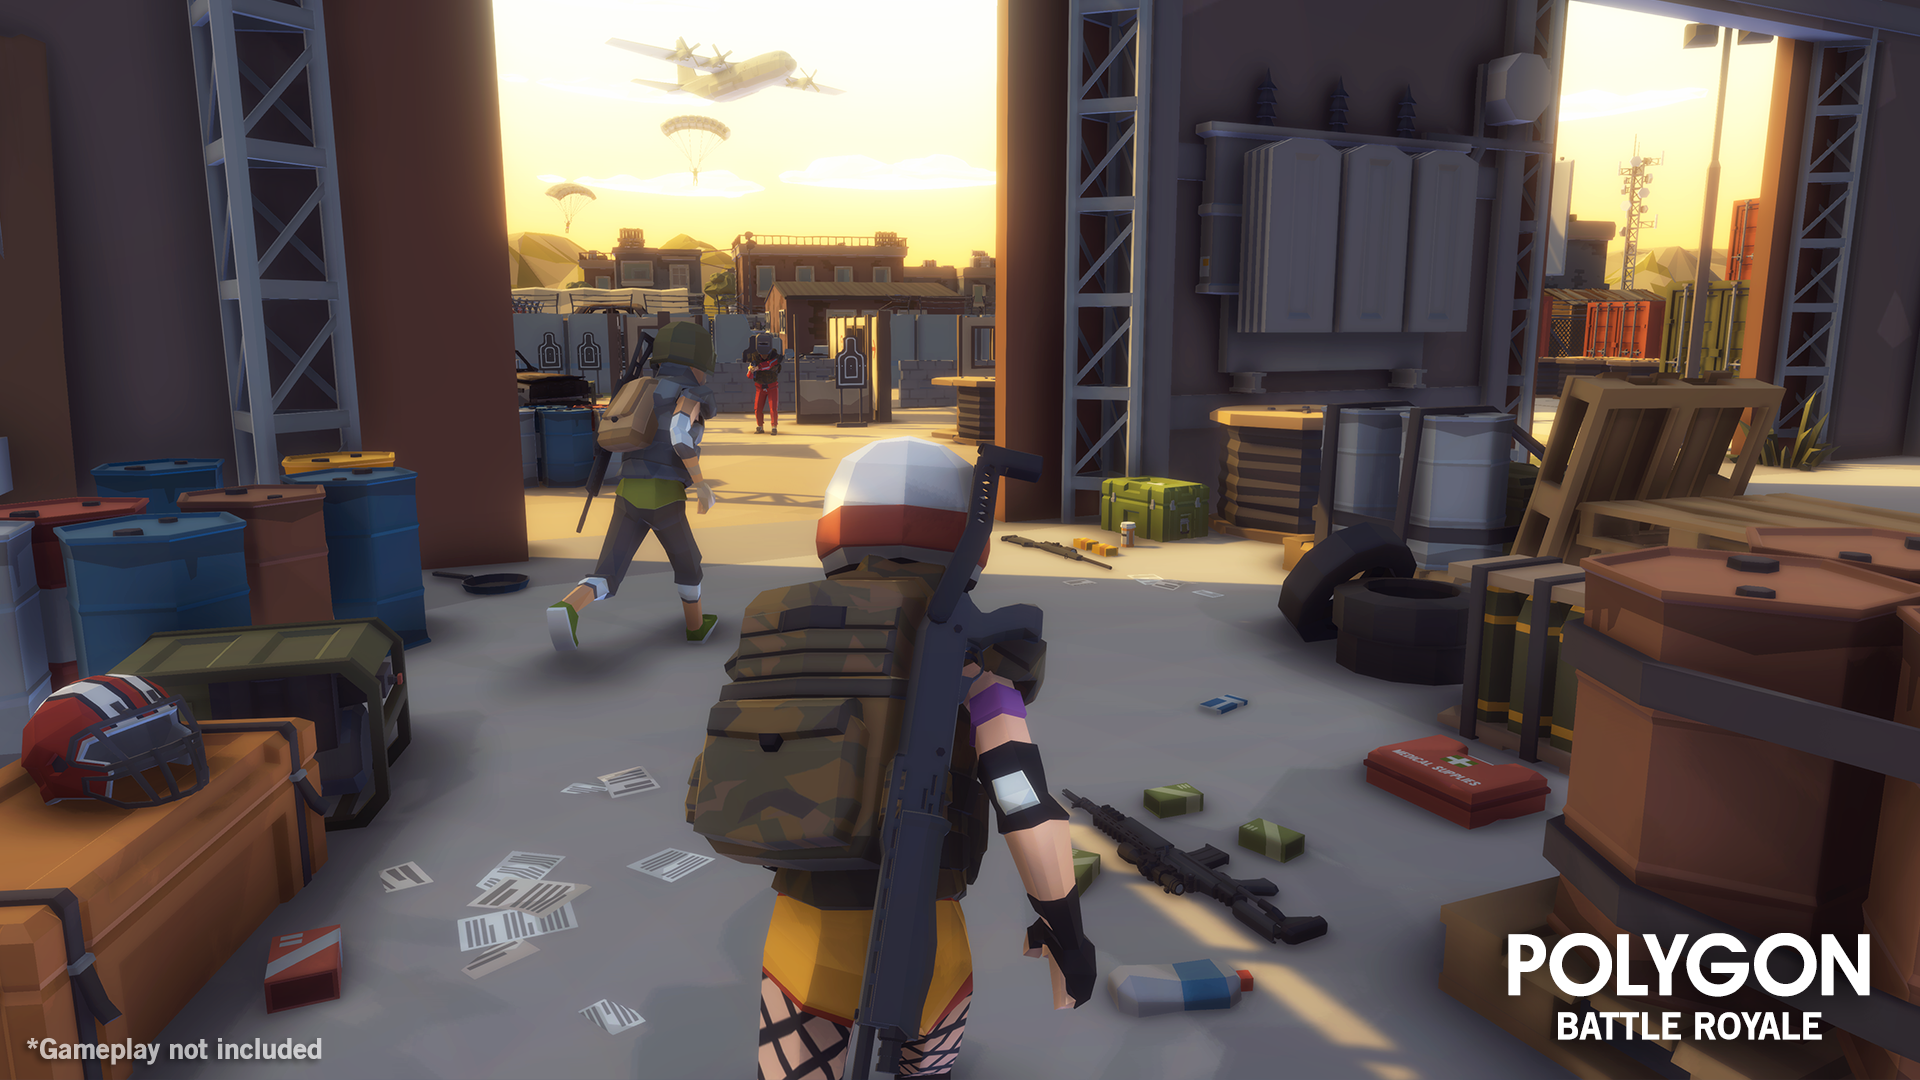 Battle Royale Pack low poly 3D character assets fighting one another in a cube style areoplane hanger